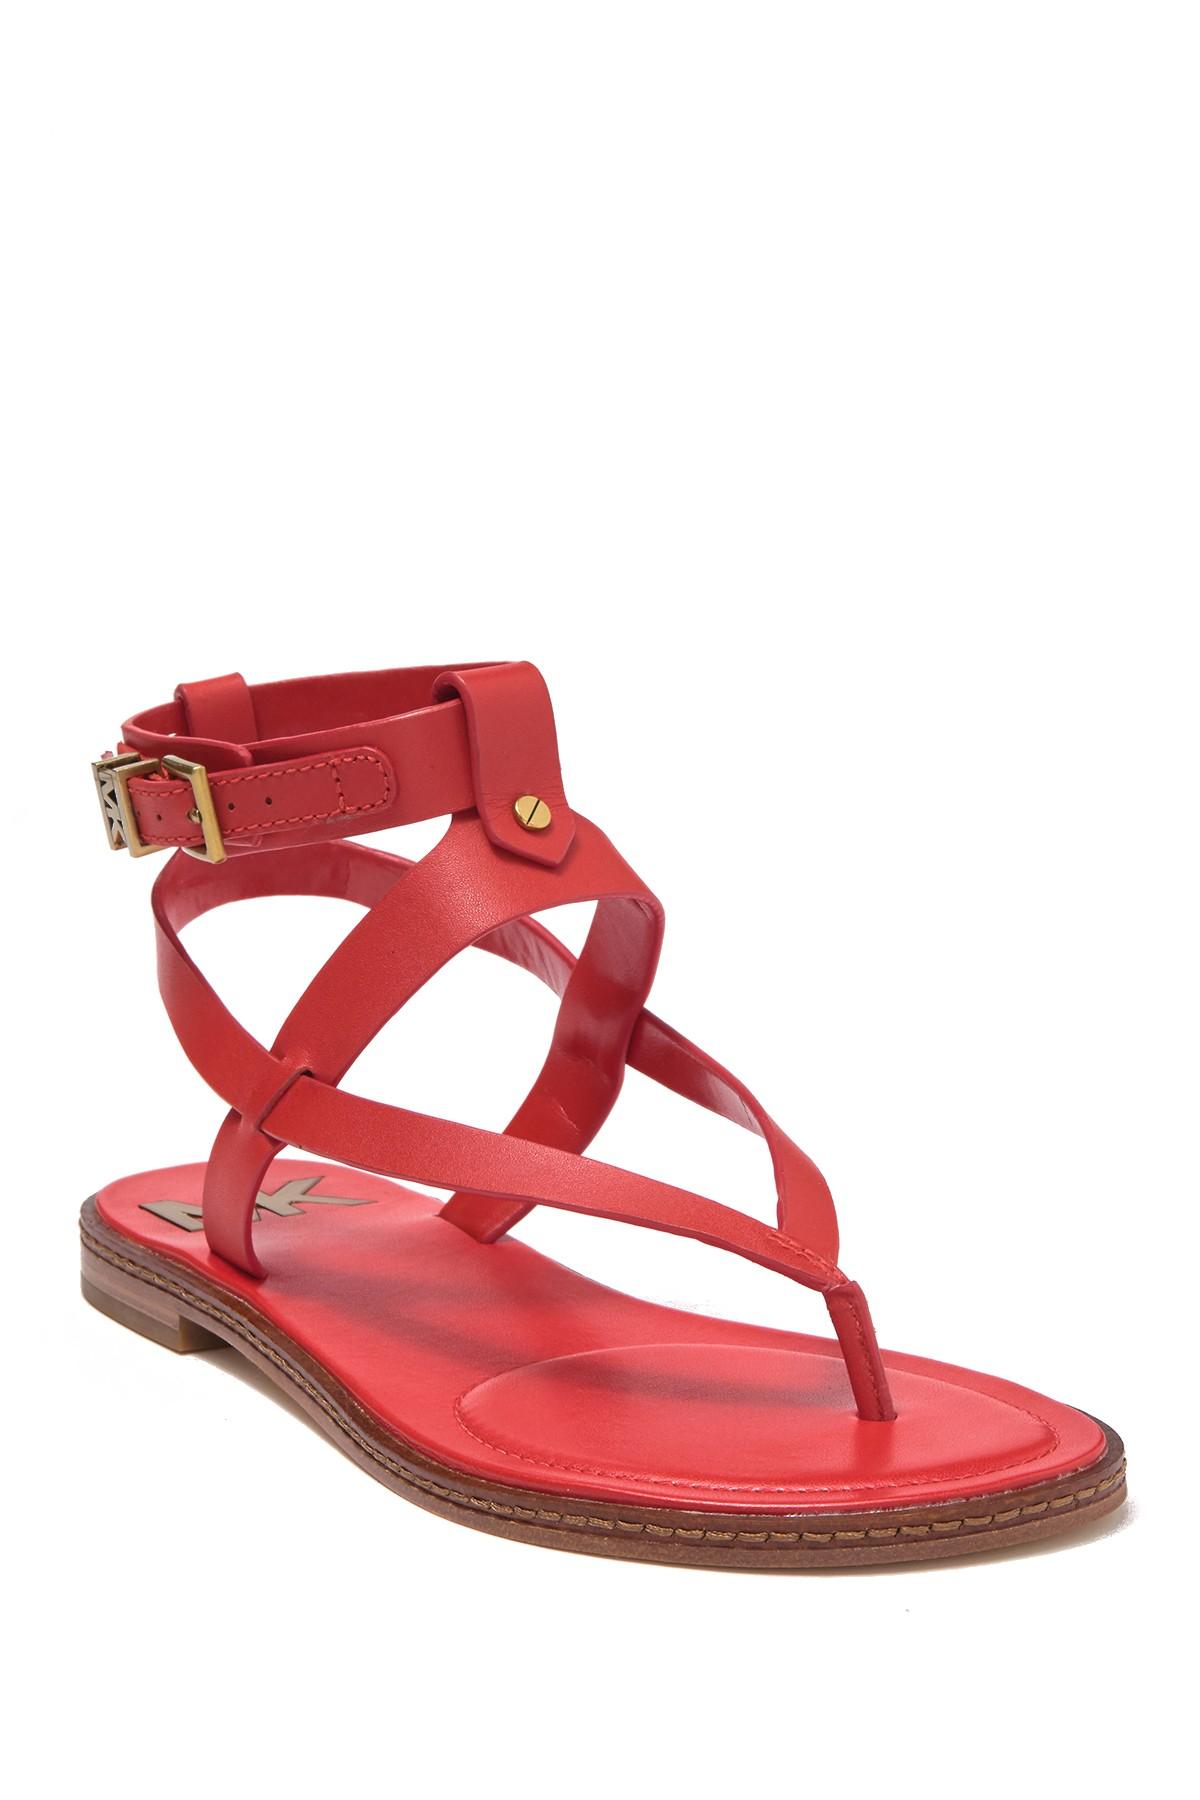 MICHAEL Michael Kors Pearson Thong Sandal in Red - Lyst